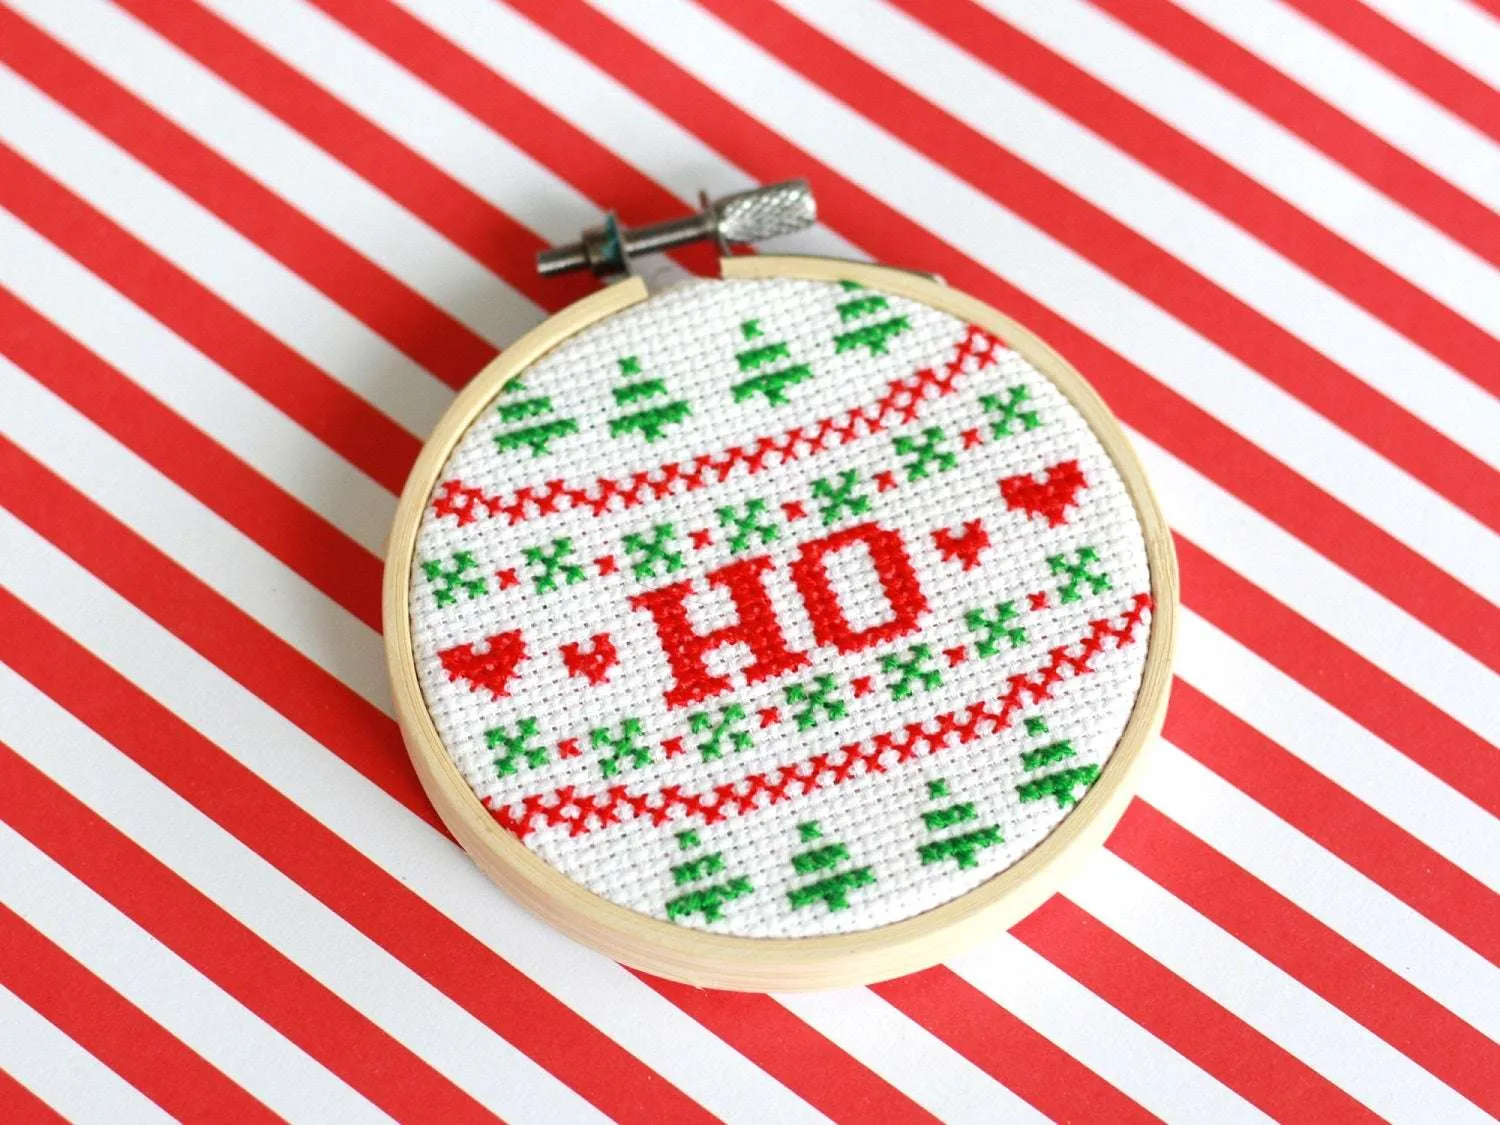 A cross stitch reading 'HO' in red text surrounded by red and green Christmas patterns, sits on a red and white striped background